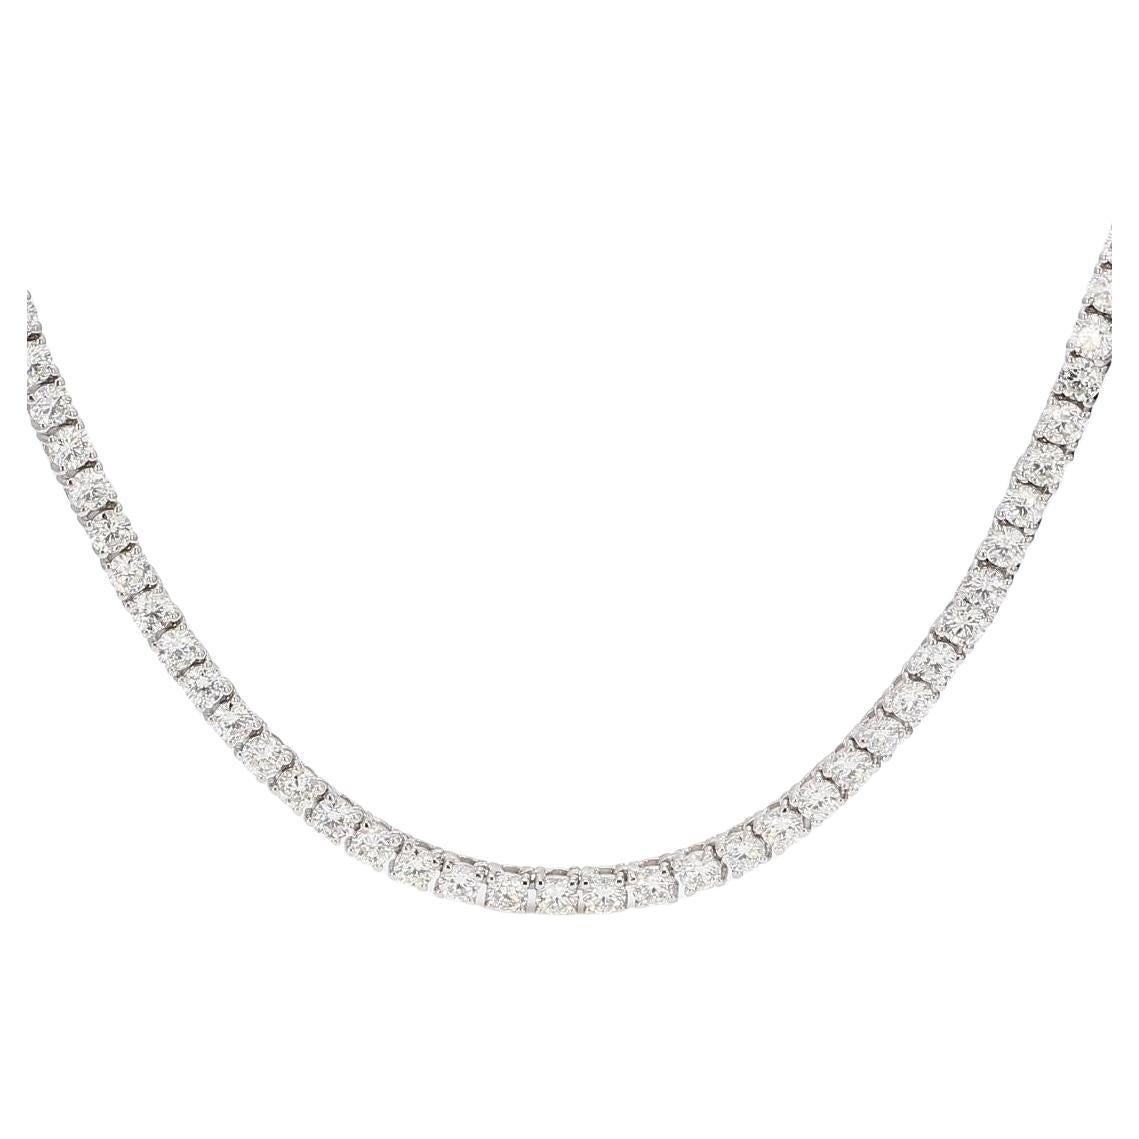 Tennis Necklace in 18K White Gold with Round Diamonds. D30.33ct.t.w. For Sale